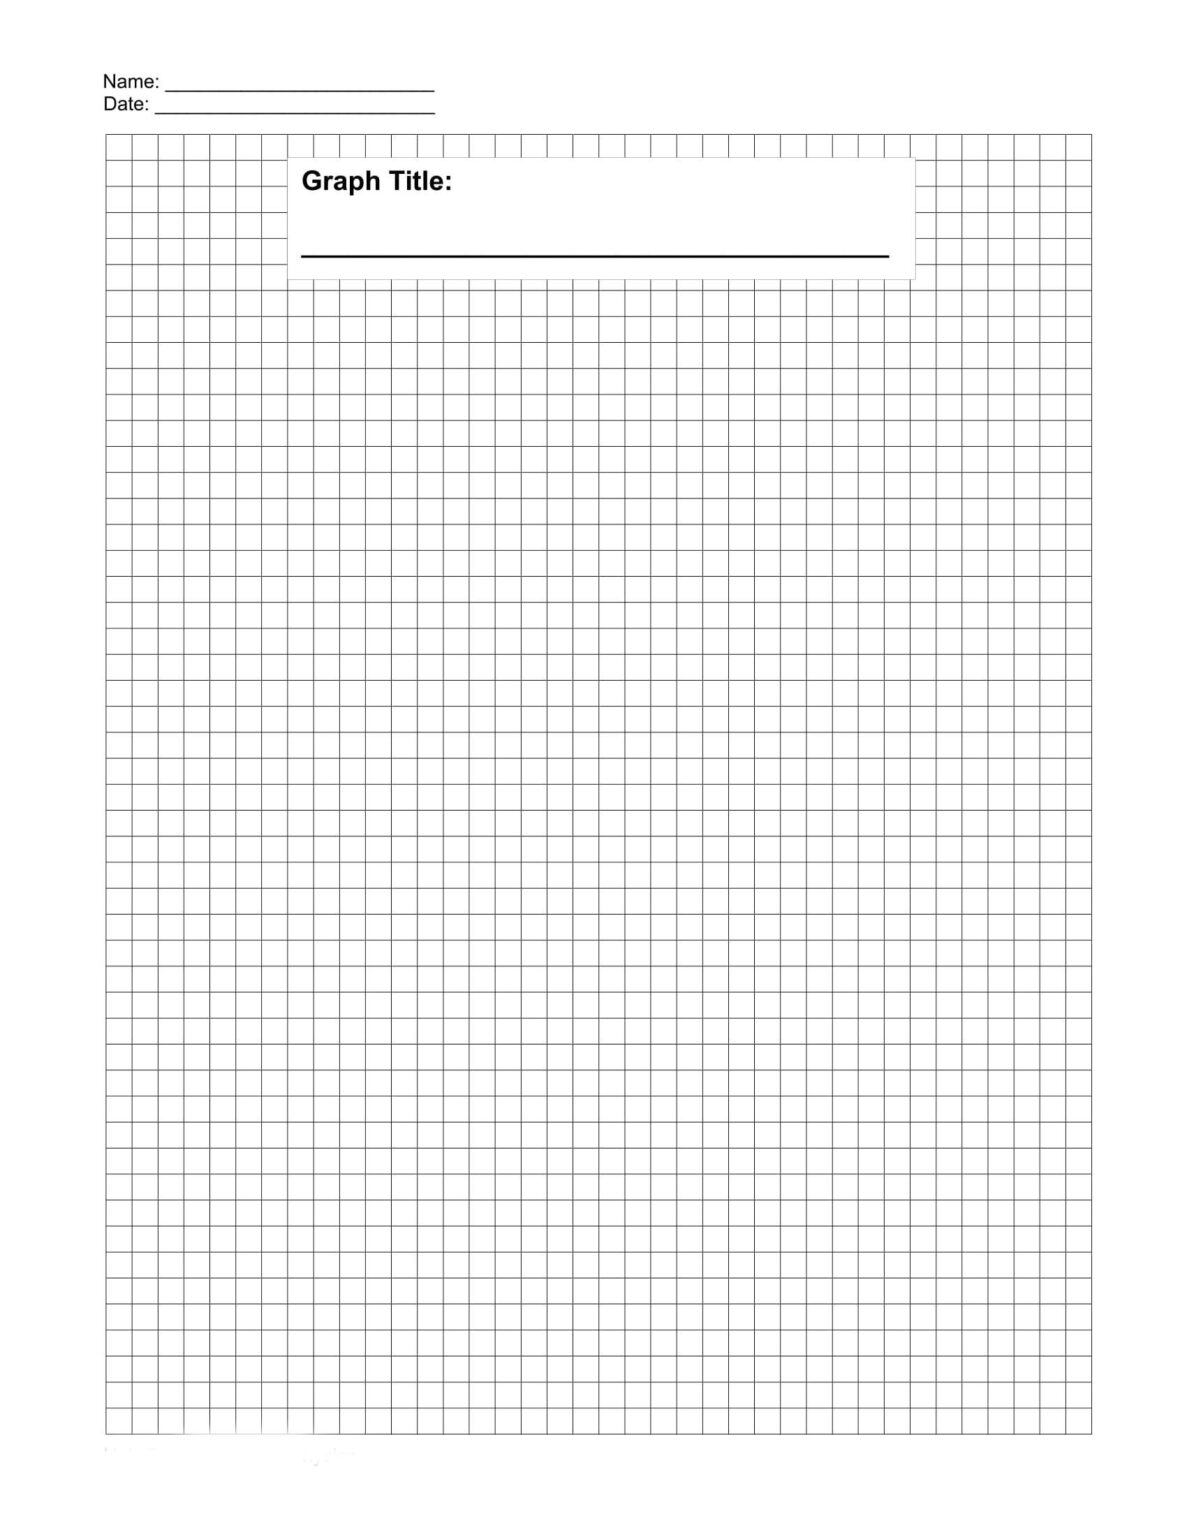 30 free printable graph paper templates word pdf in